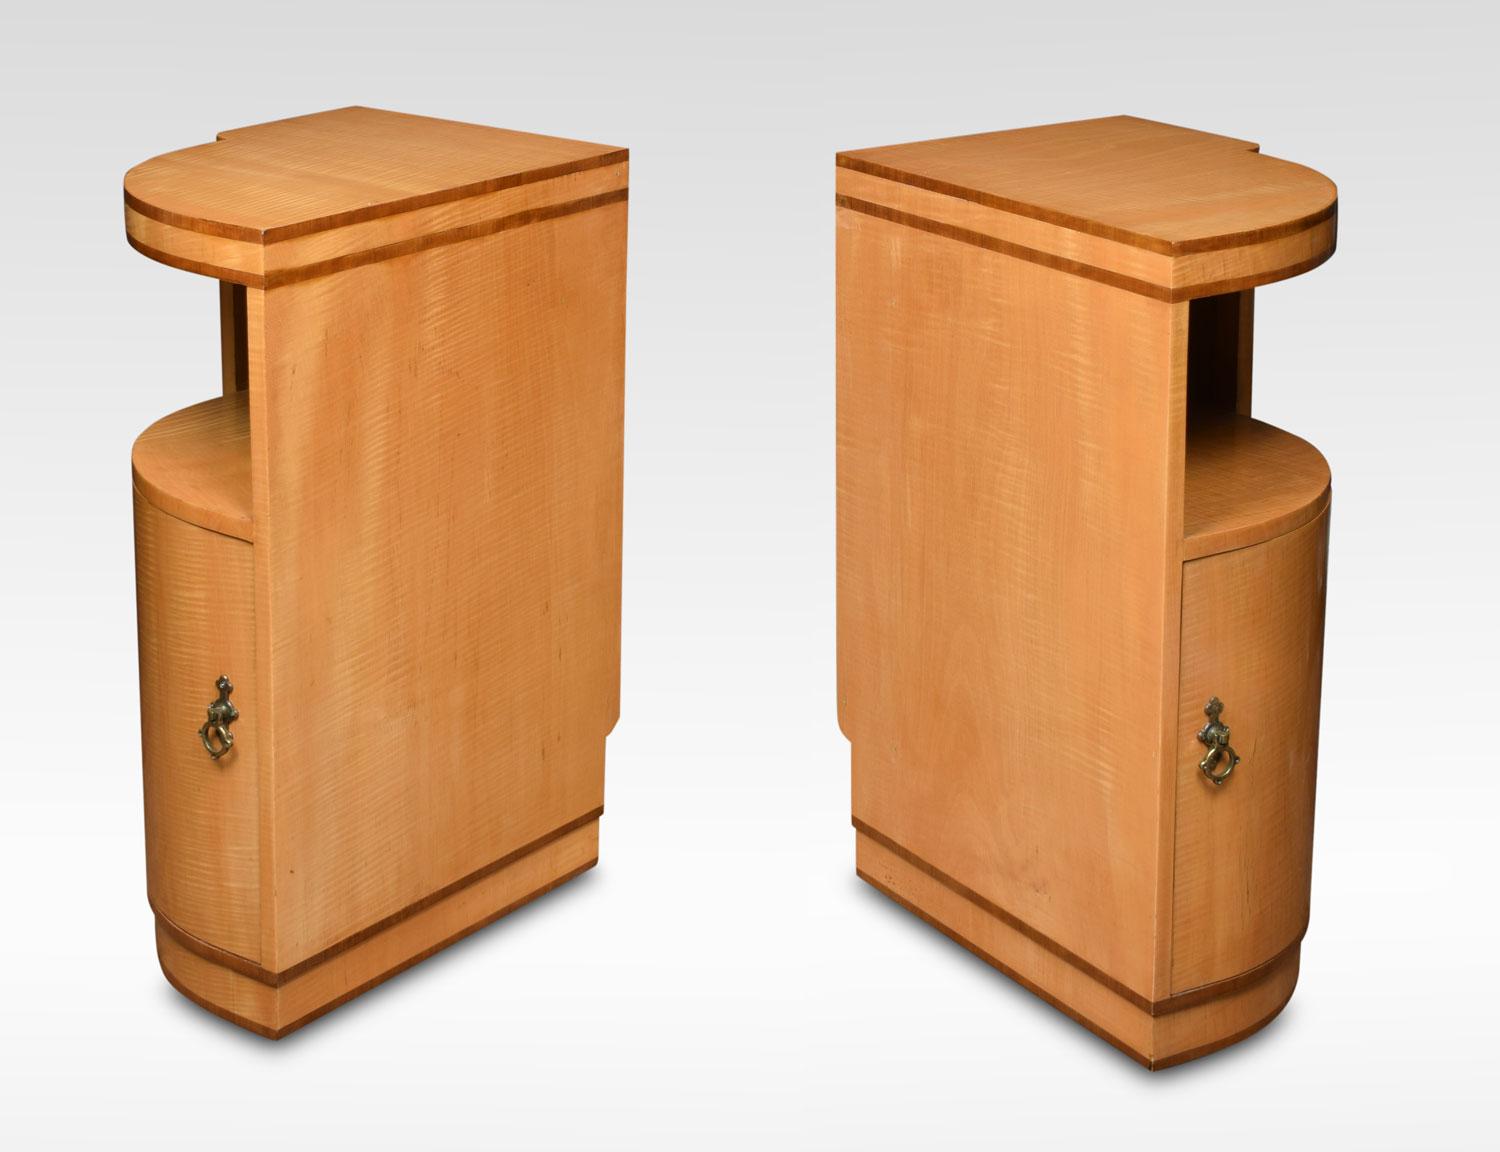 Pair of Art Deco maple and walnut banded bedside cabinets. Having curved fronts with single door opening to reveal single fixed shelf all raised up on shaped plinths.
Dimensions:
Height 30 inches
Width 14 inches
Depth 20 inches.